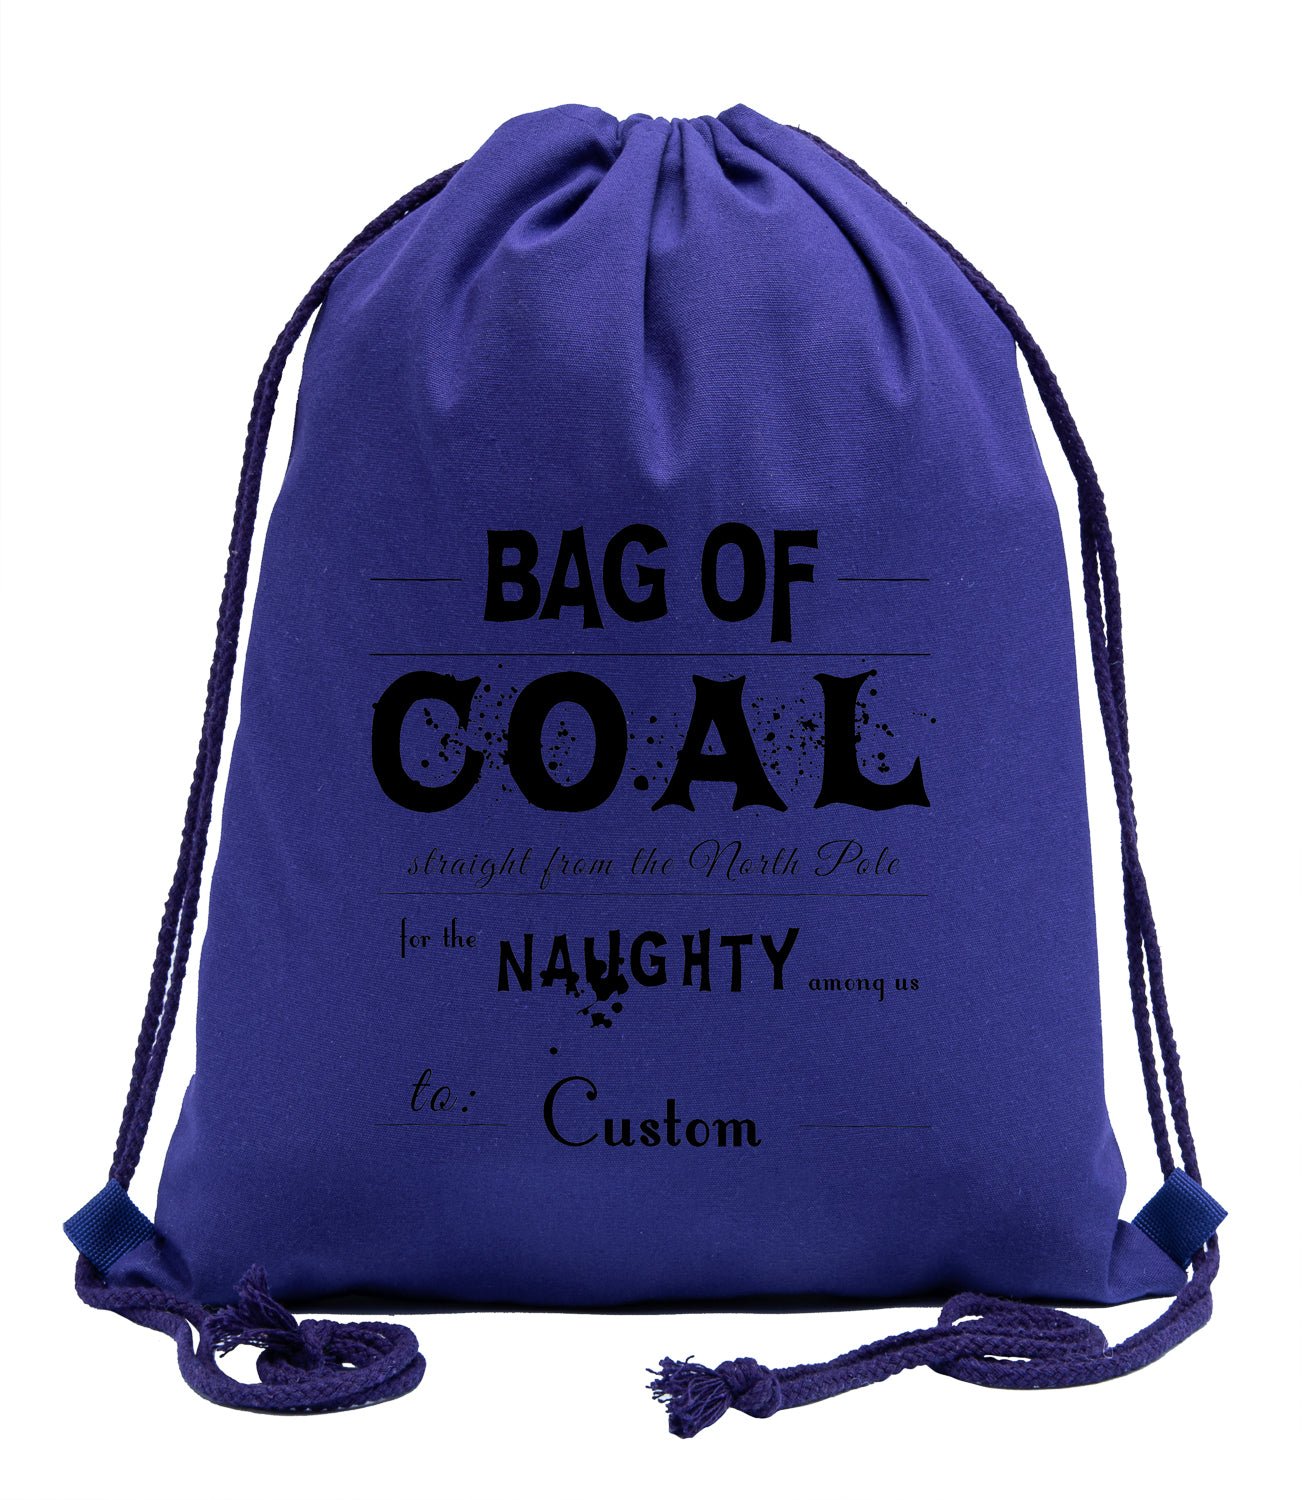 Coal Straight From the North Pole To: Custom Cotton Drawstring Bag - Mato & Hash